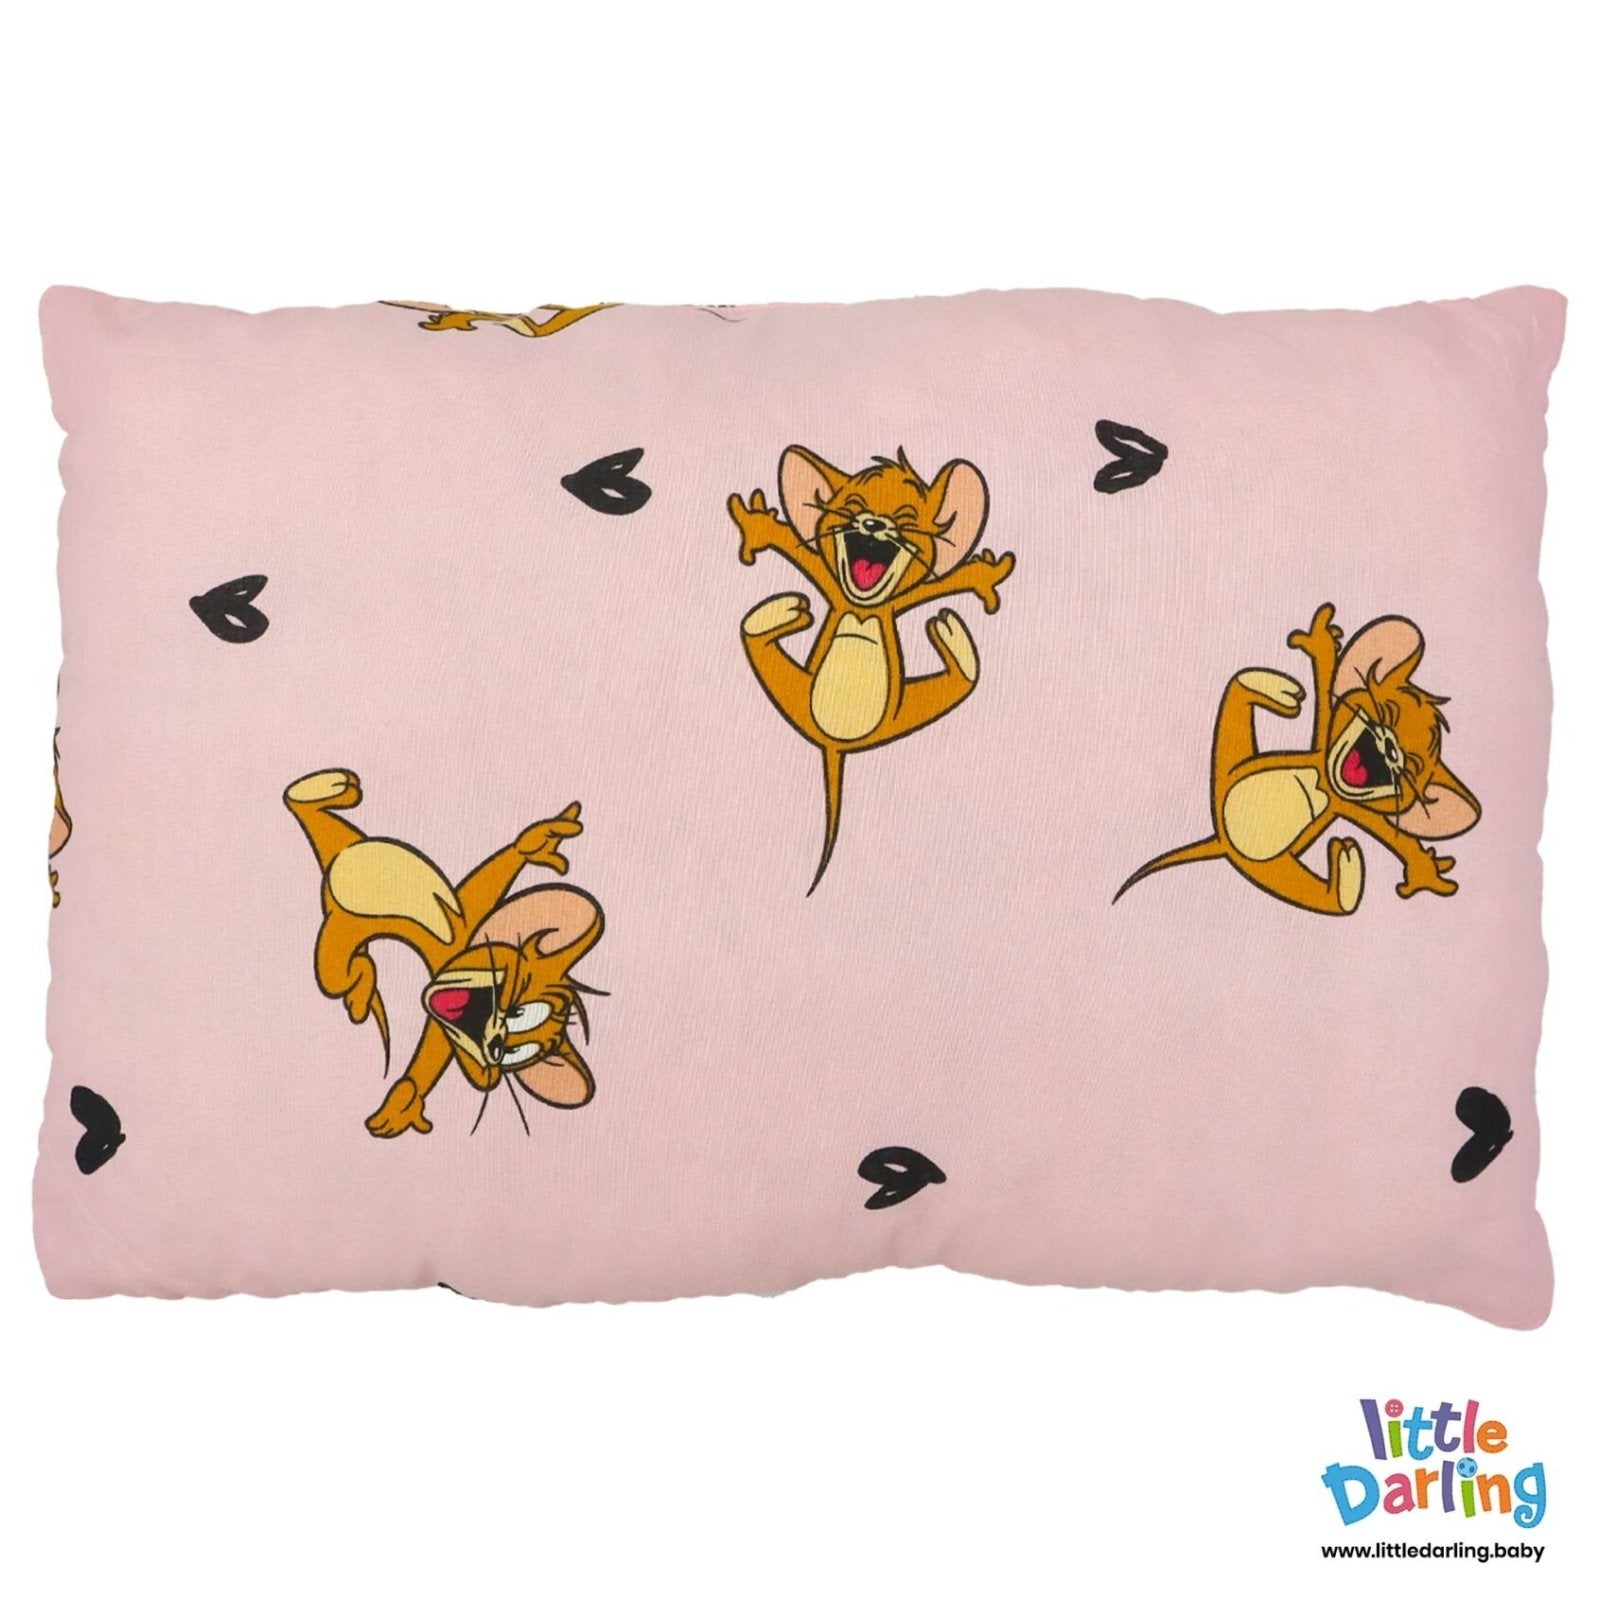 Head Pillow Jerry Print by Little Darling